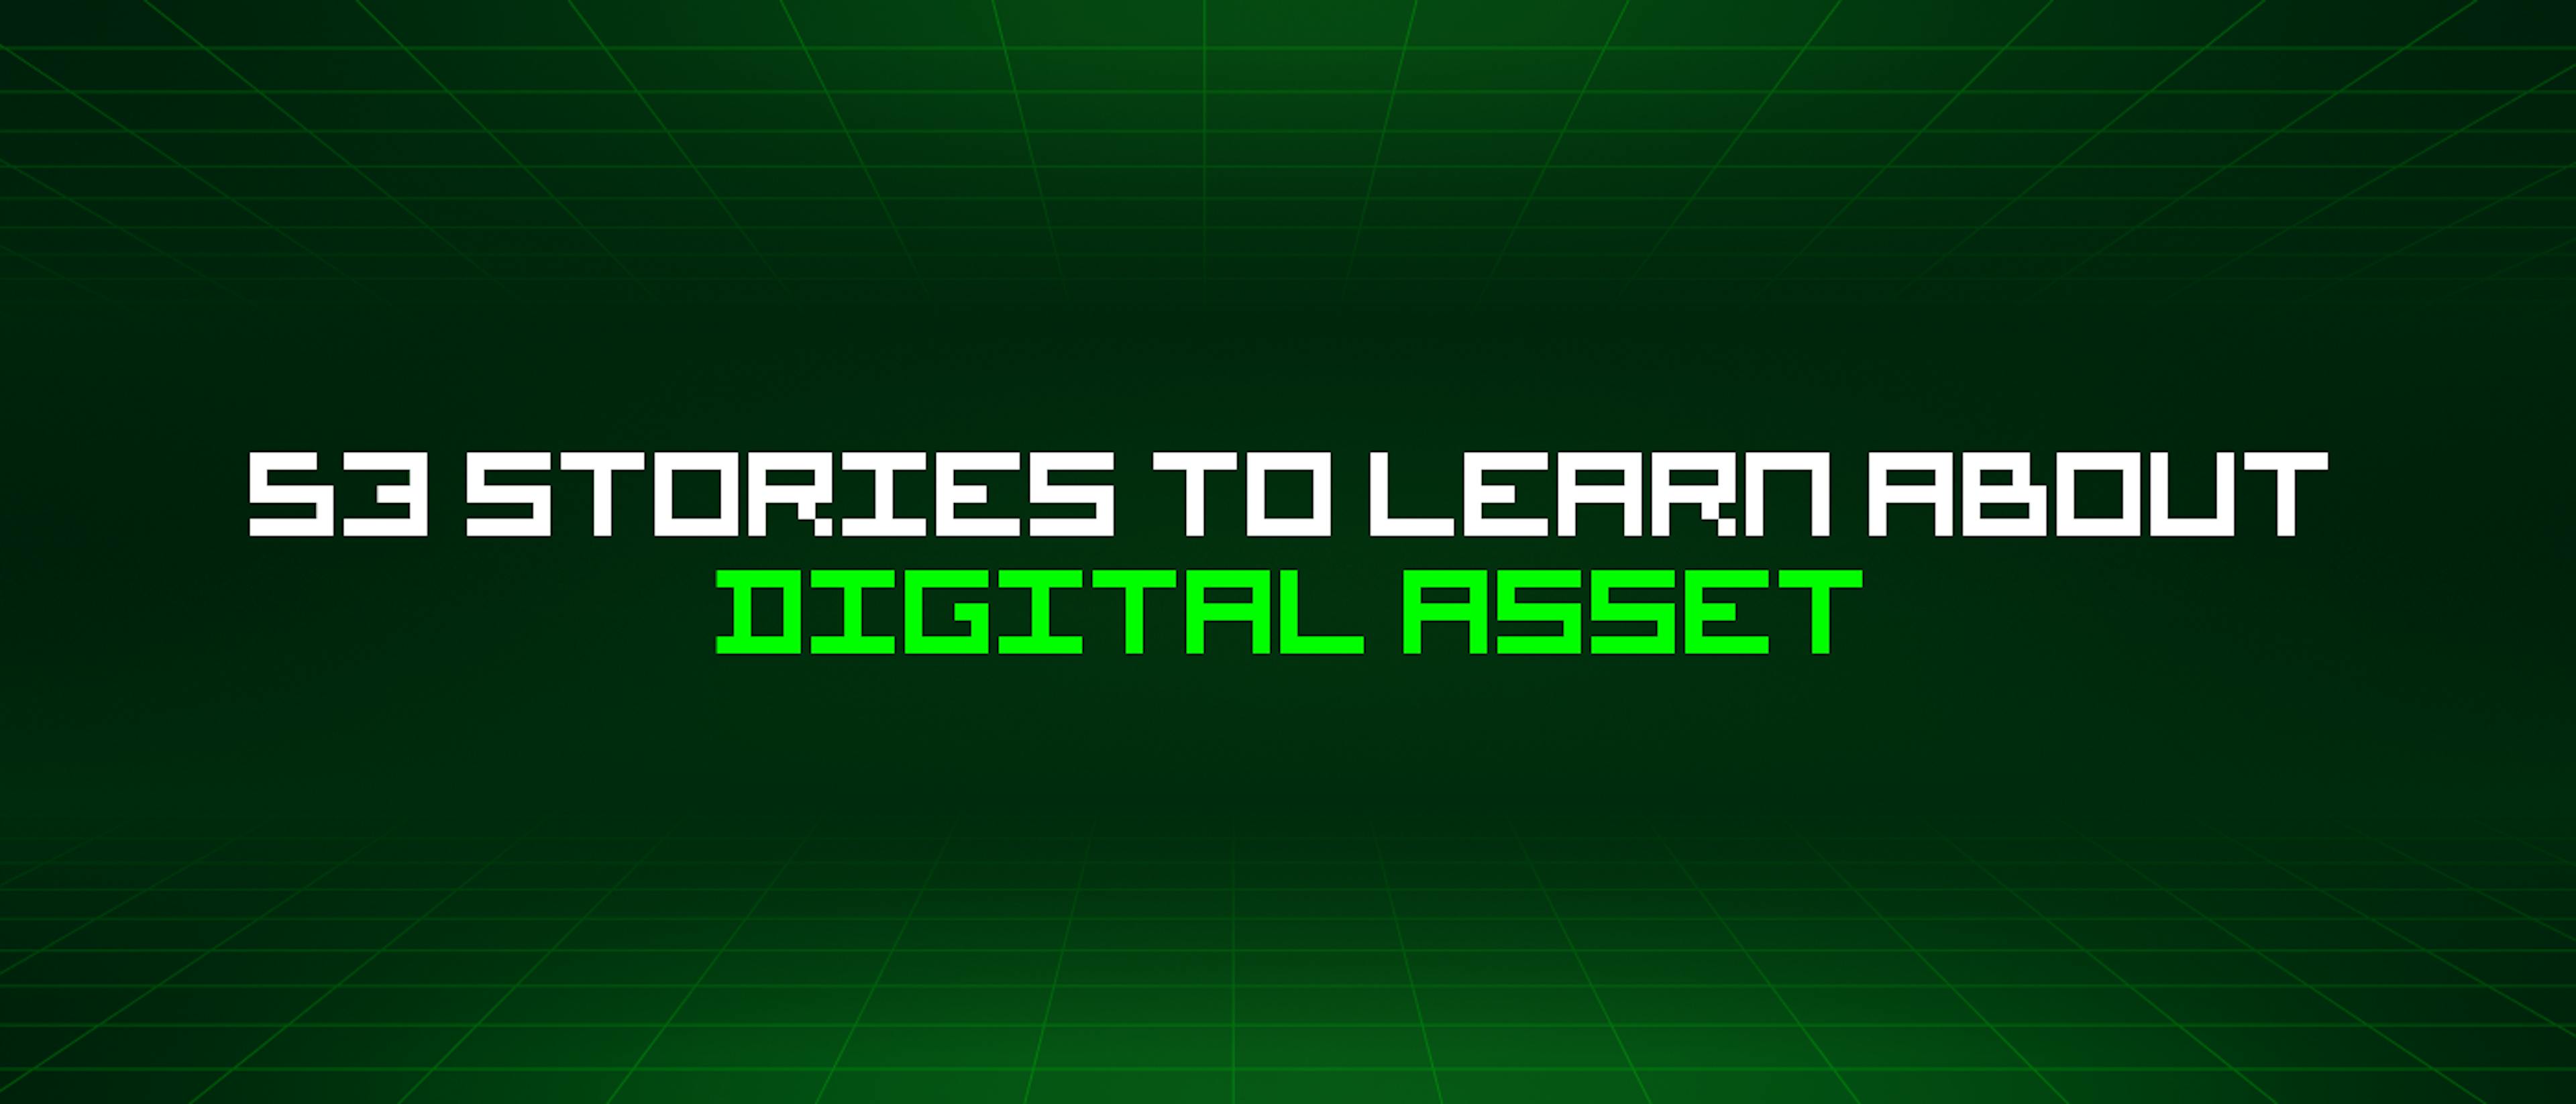 featured image - 53 Stories To Learn About Digital Asset